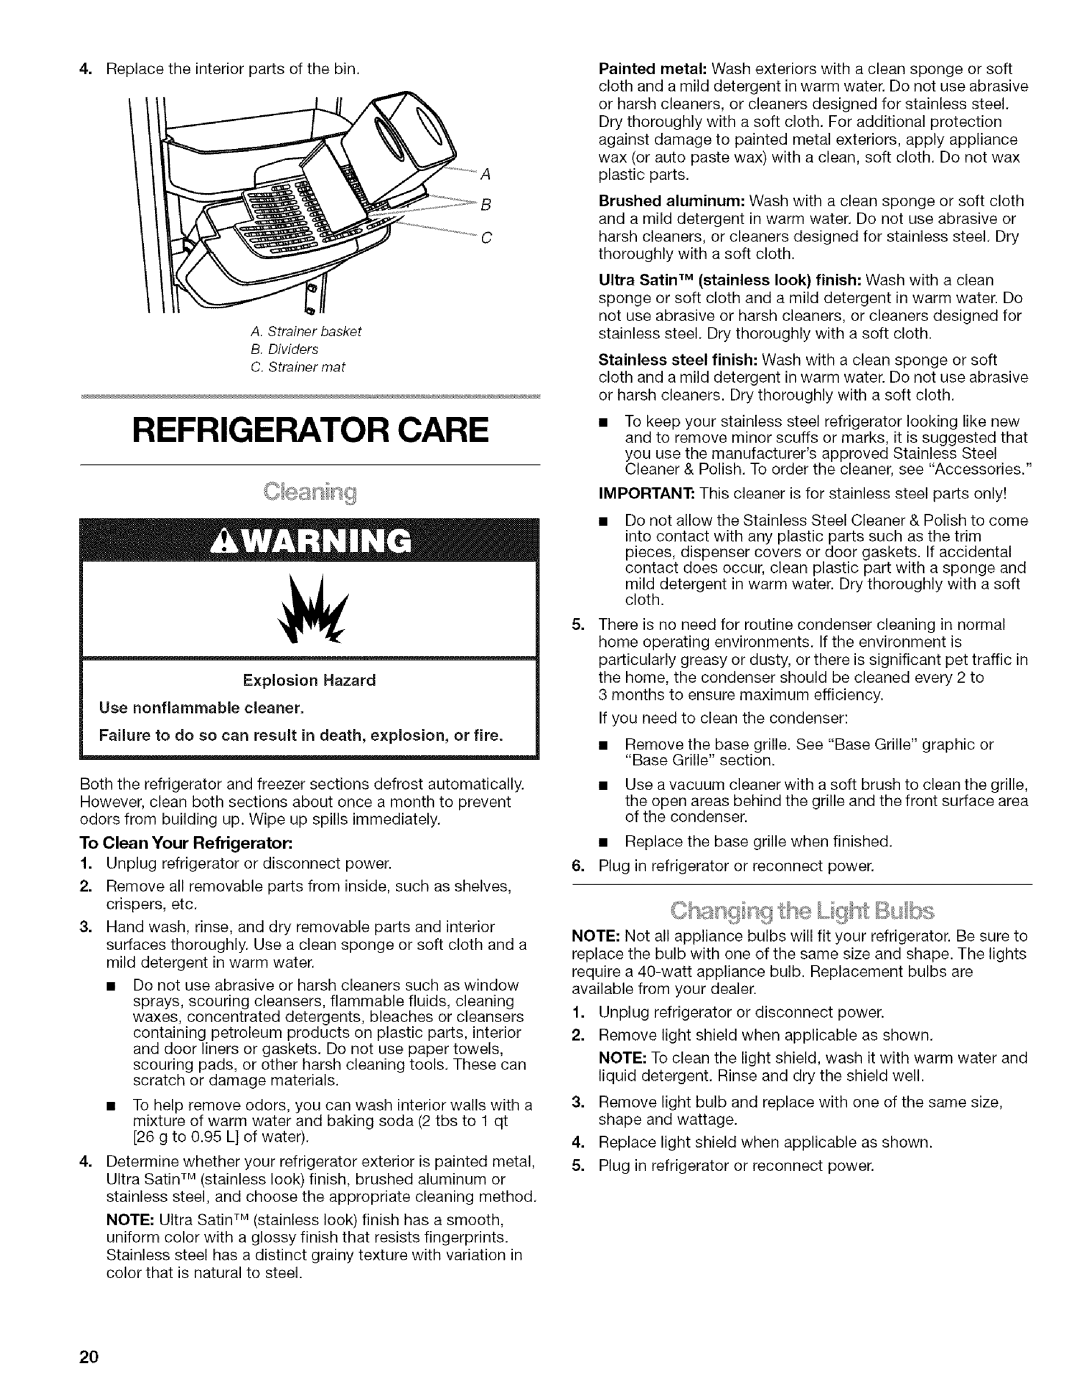 Kenmore 2318589 manual Refrigerator Care, To Clean Your Refrigerator 